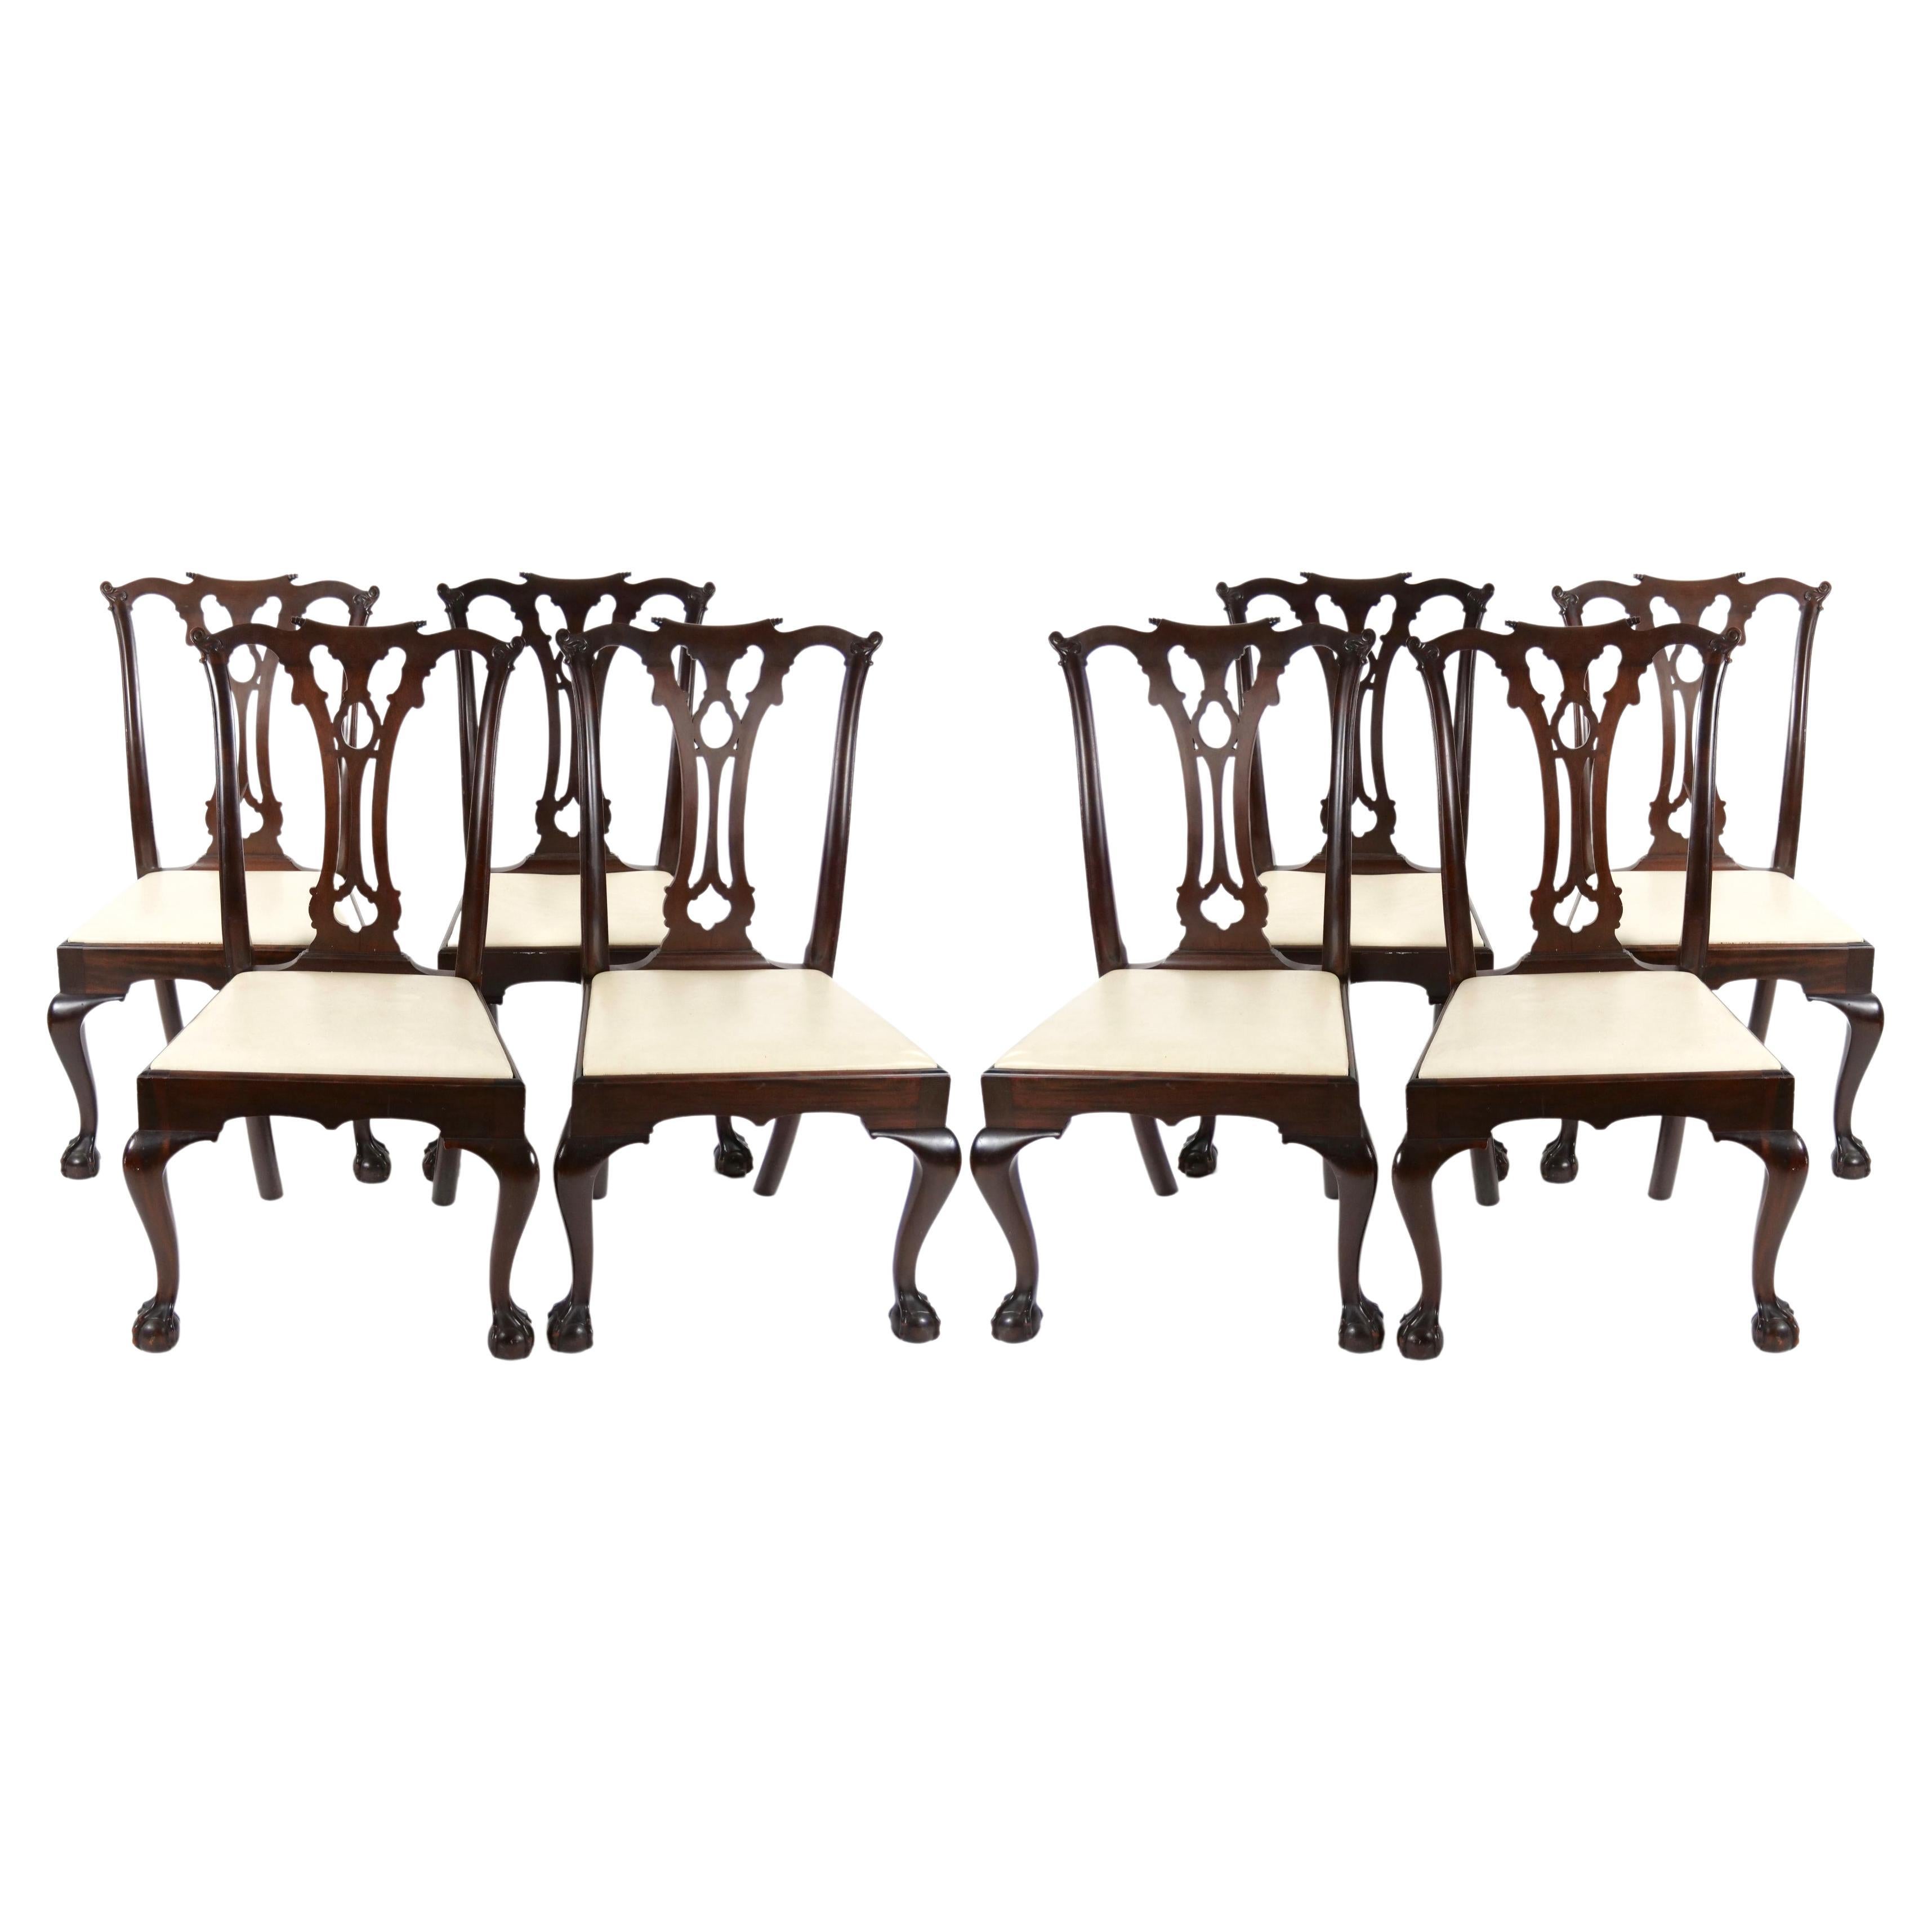 Mahogany Wood Framed (8) Chippendale Style Dining Chairs